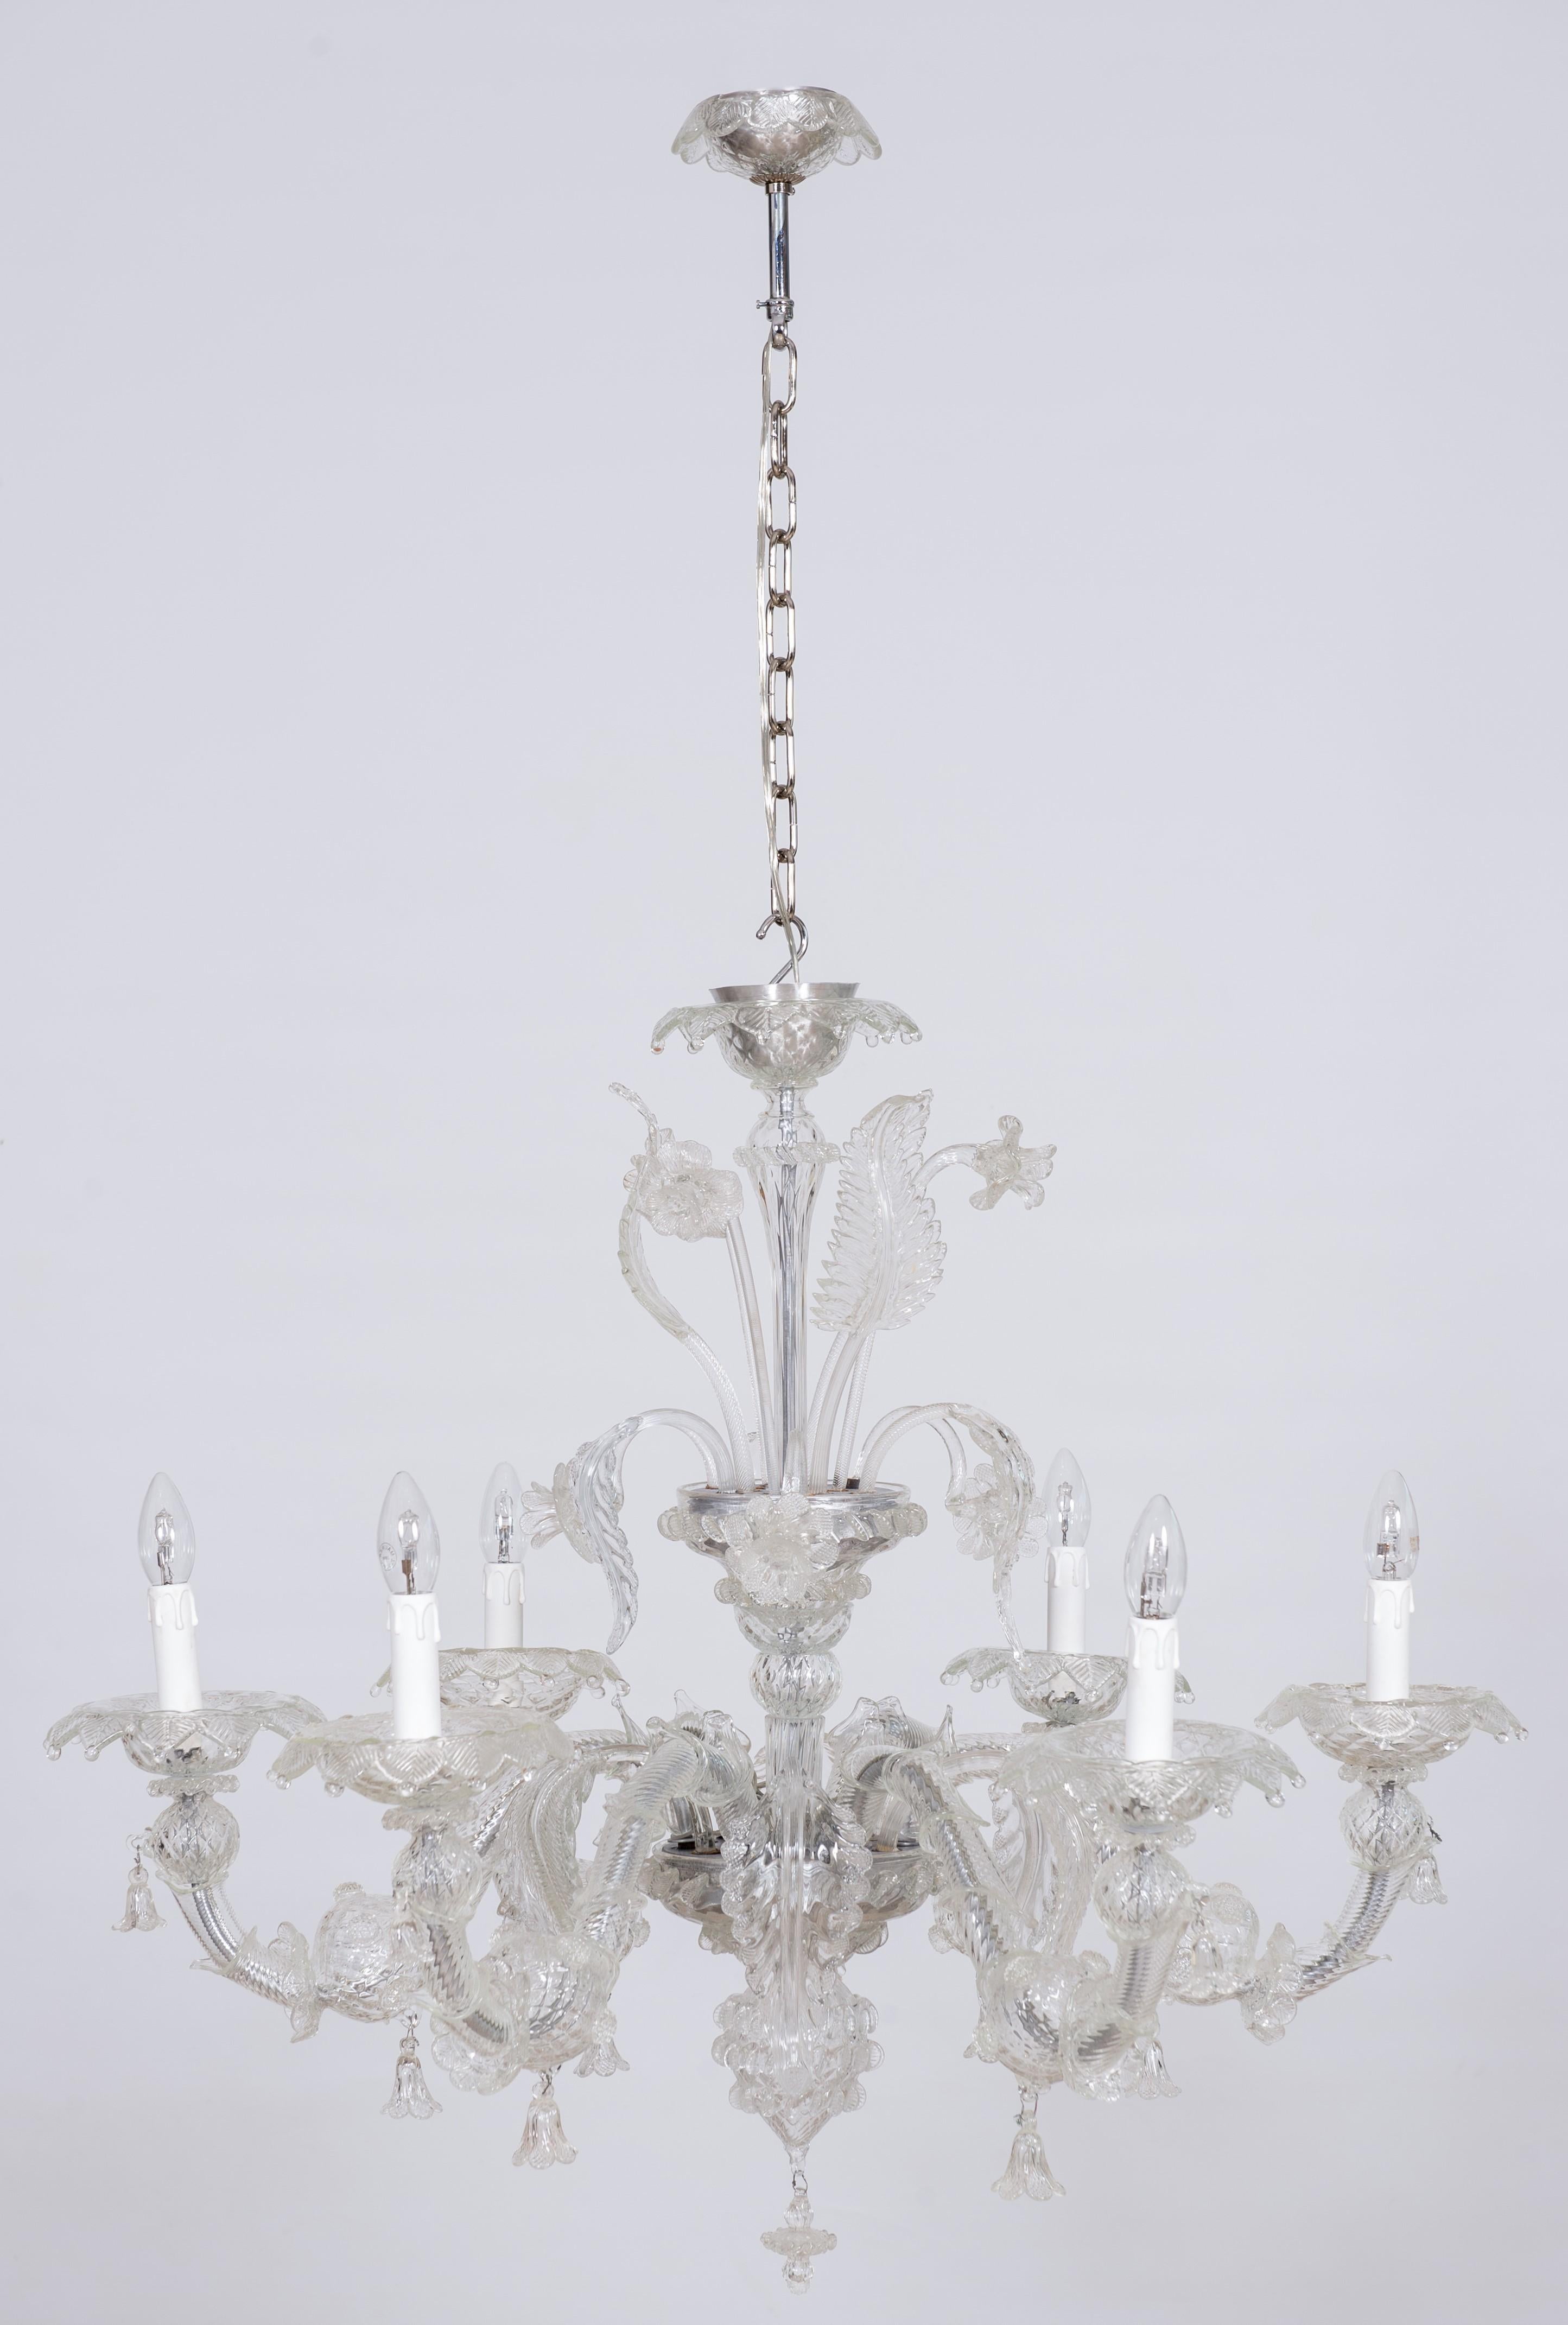 Venetian Rezzonico chandelier in transparent Murano glass with 6 lights, Italy.
This marvellous chandelier is an outstanding example of Italian glass art and passion for details. Made of transparent Murano glass, it has six arms decorated with wavy